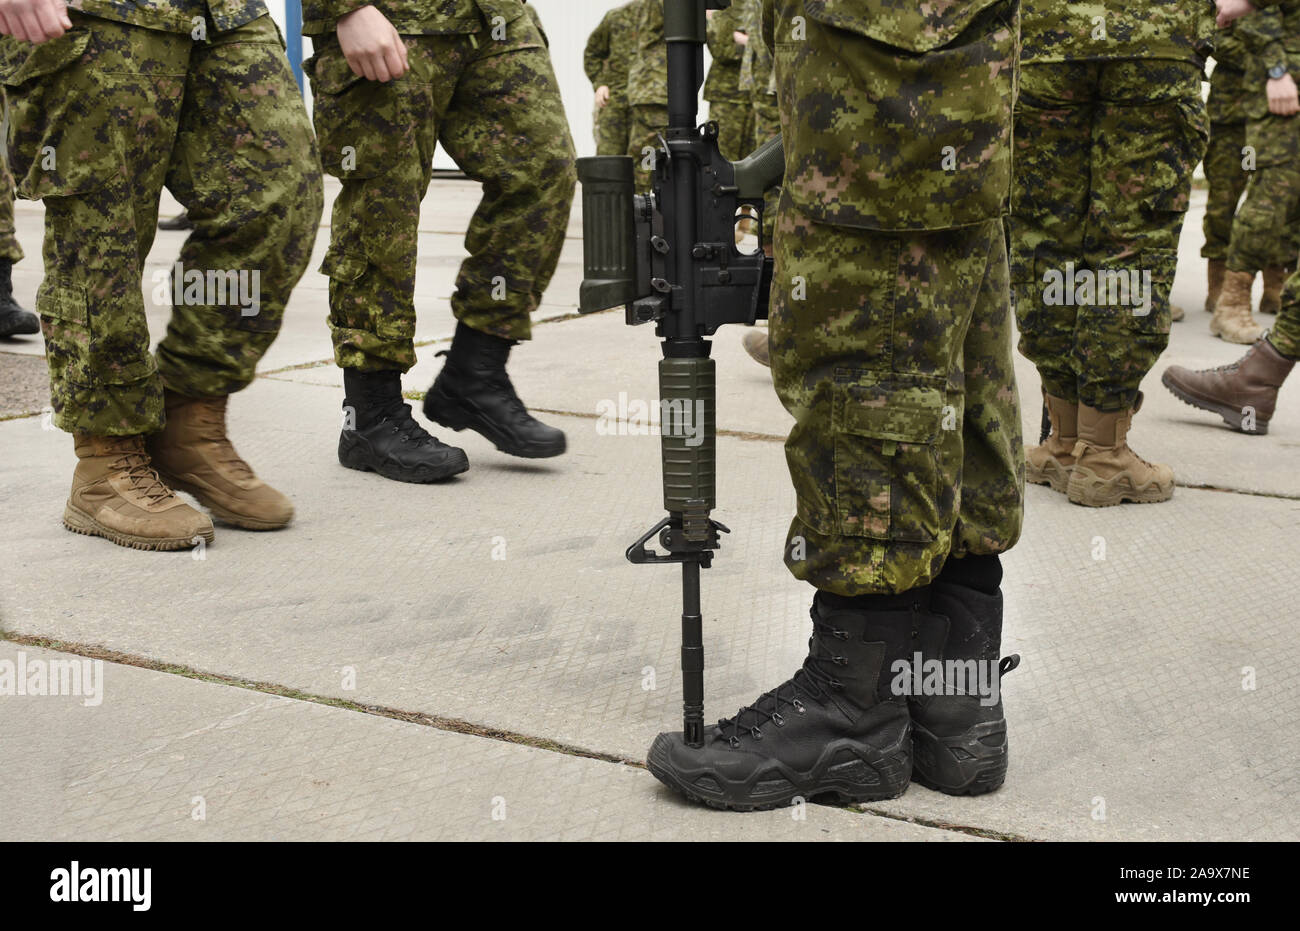 Soldier with weapon. Armistice. Armed forces, troops, army. Military concept. Stock Photo